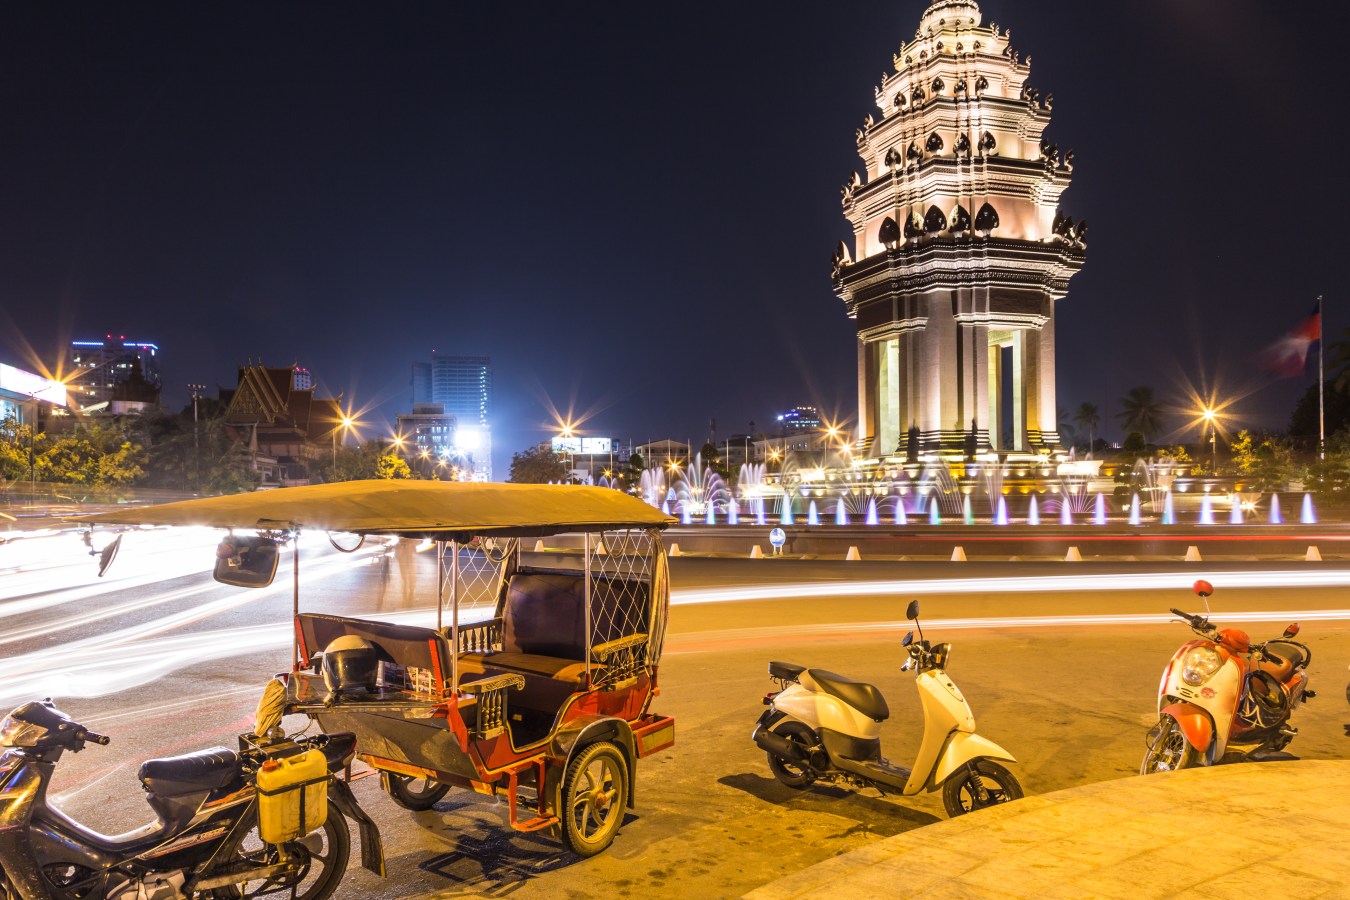 Tuk Tuk parked in front of the Independence monument, inspired by Khmer traditional architecture, in Phnom Penh, Cambodia capital city at night.